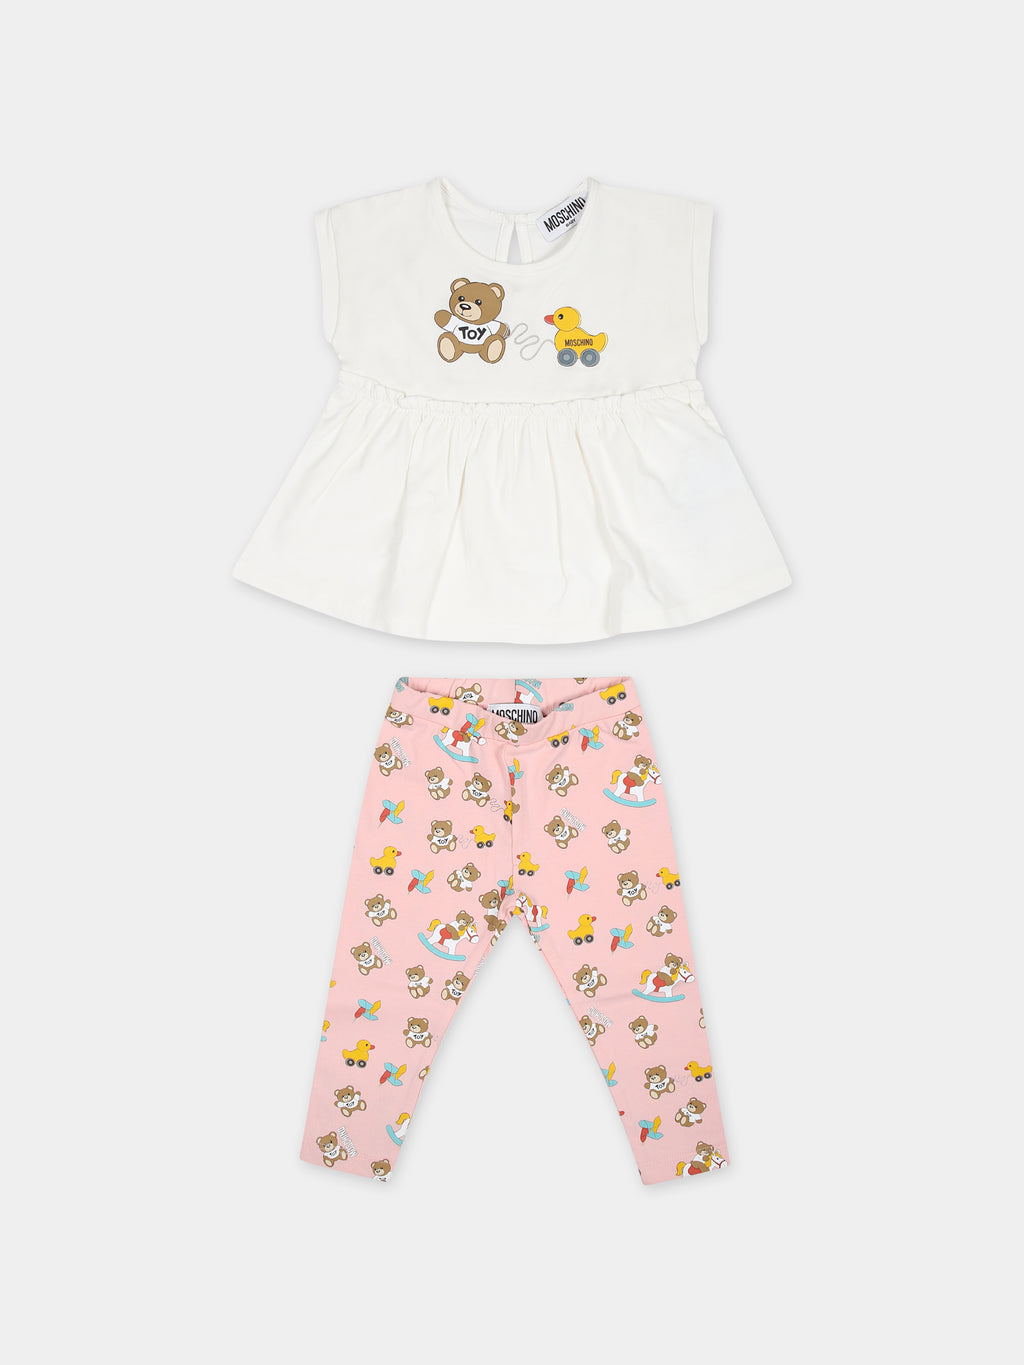 Multicolor set for baby girl with Teddy Bear and ducks